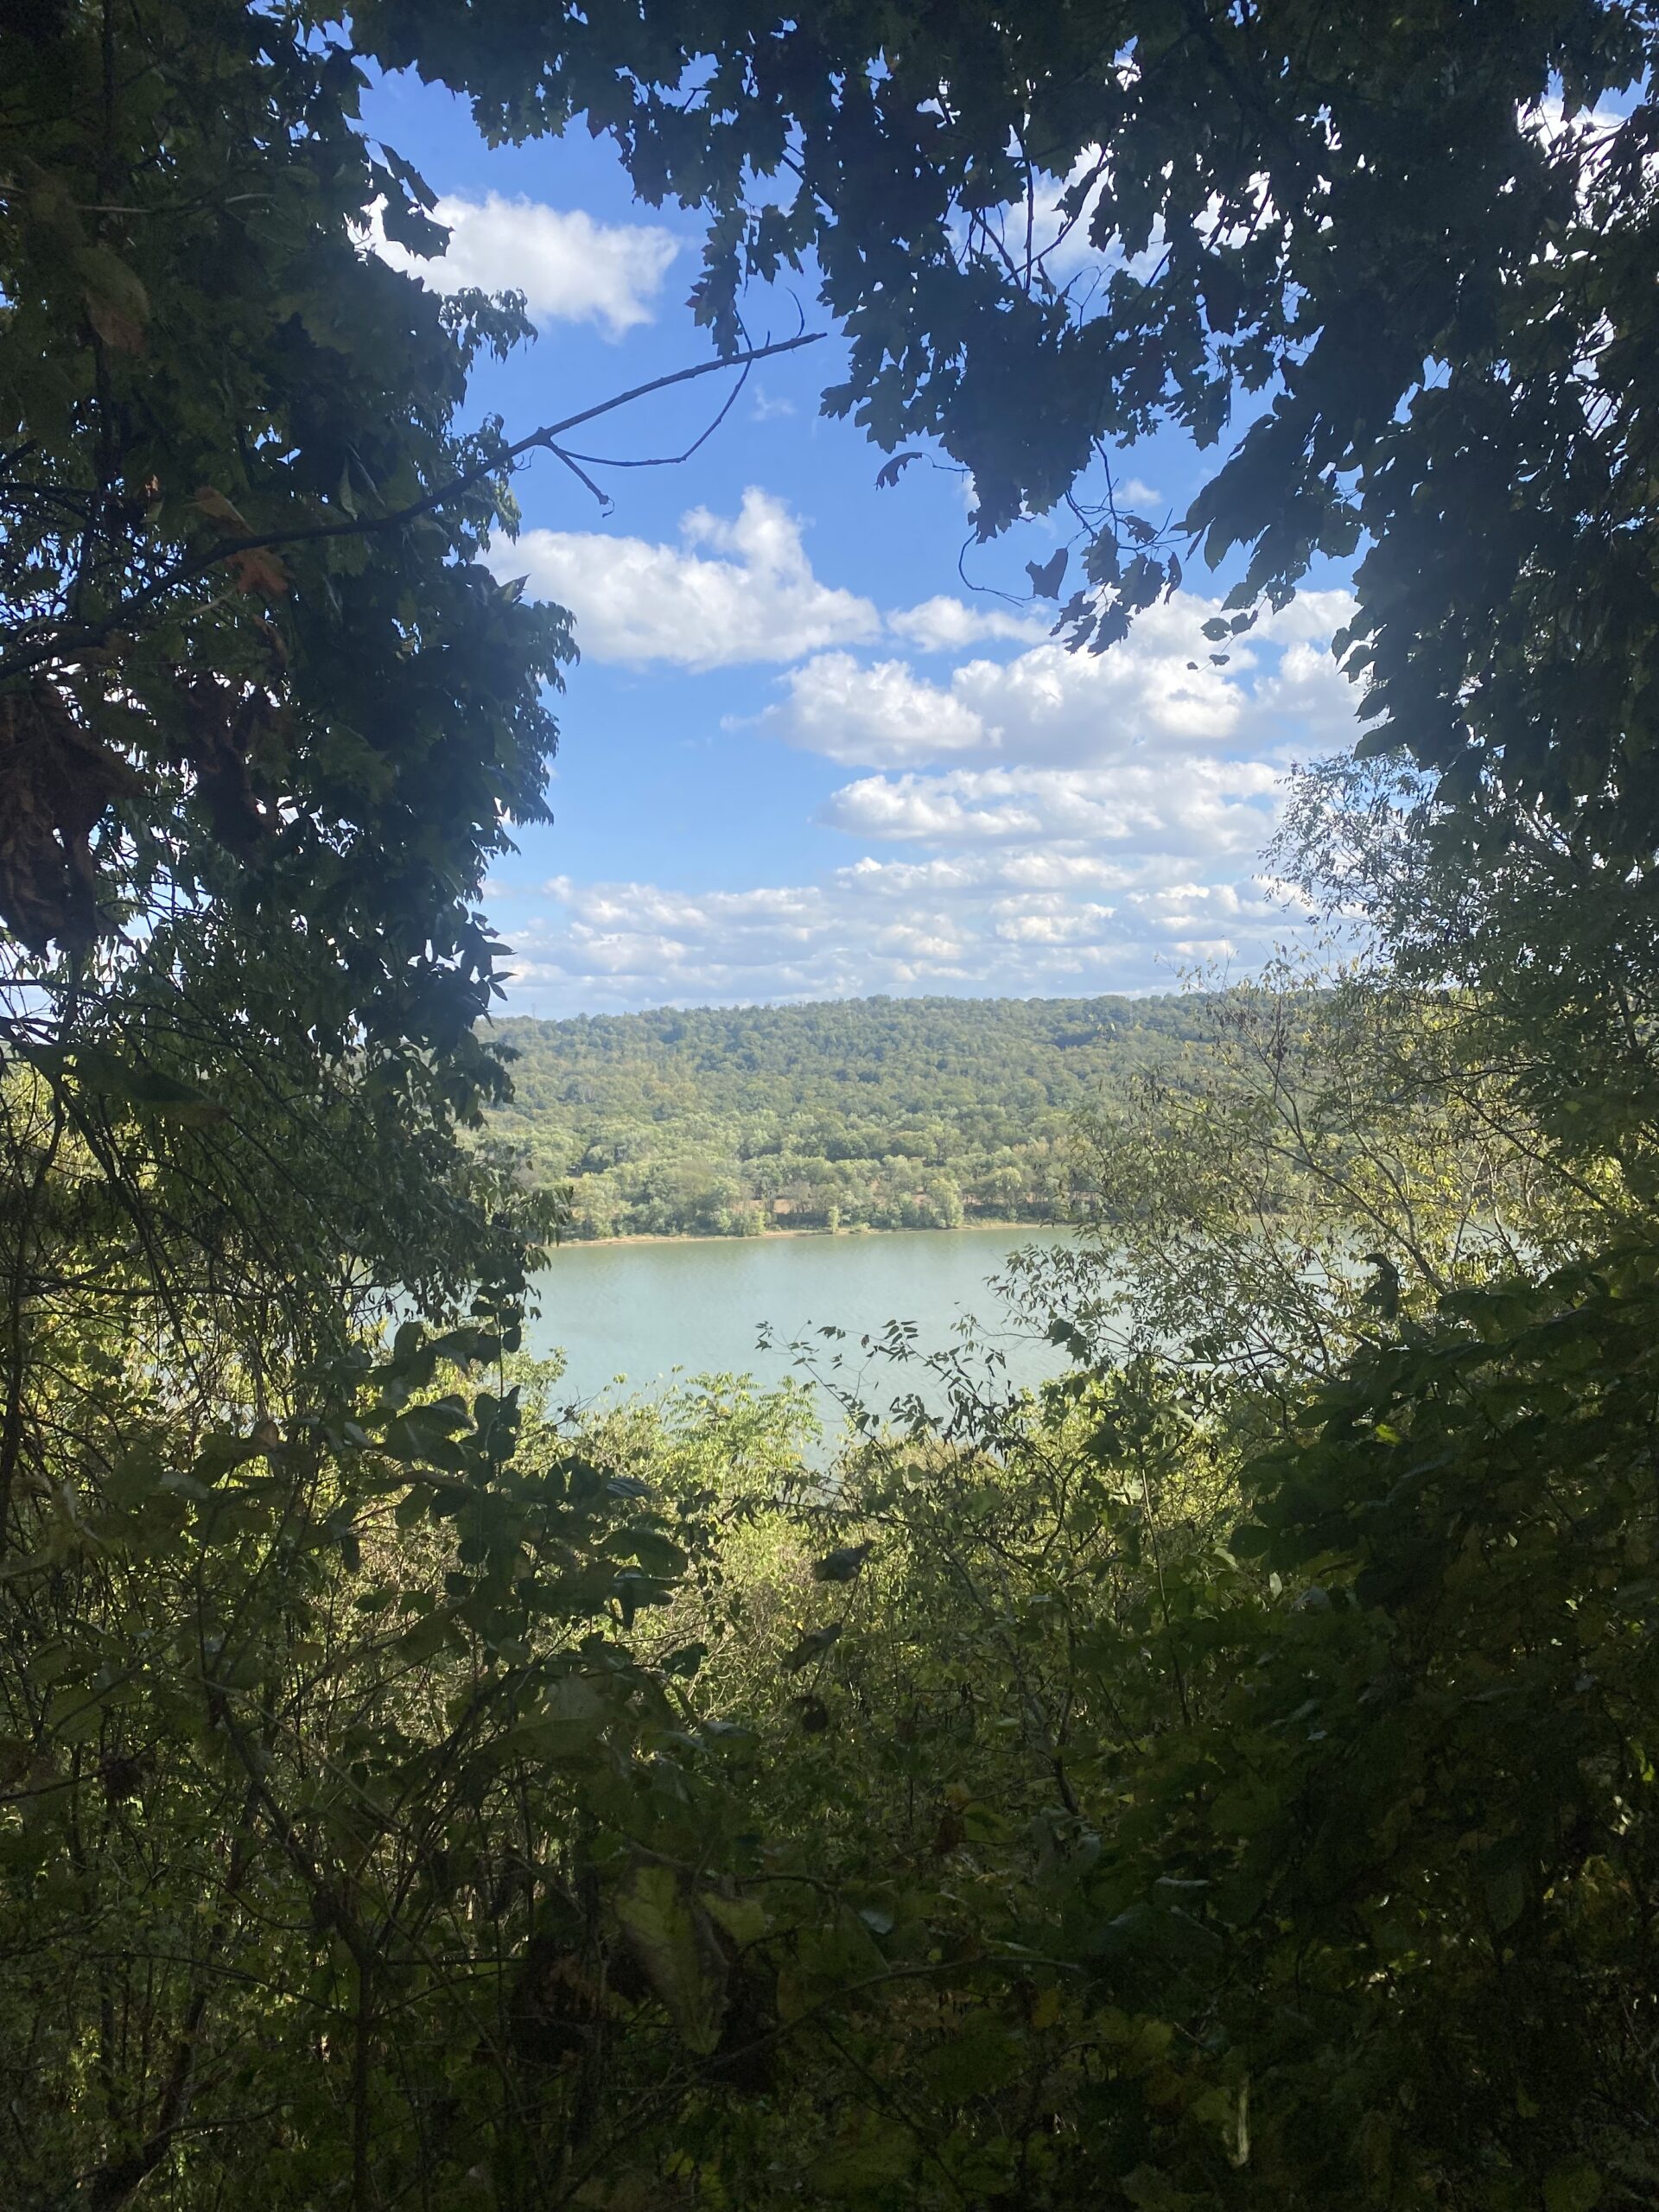 An image of Shawnee lookout. A river is seen through an opening of trees on a sunny day